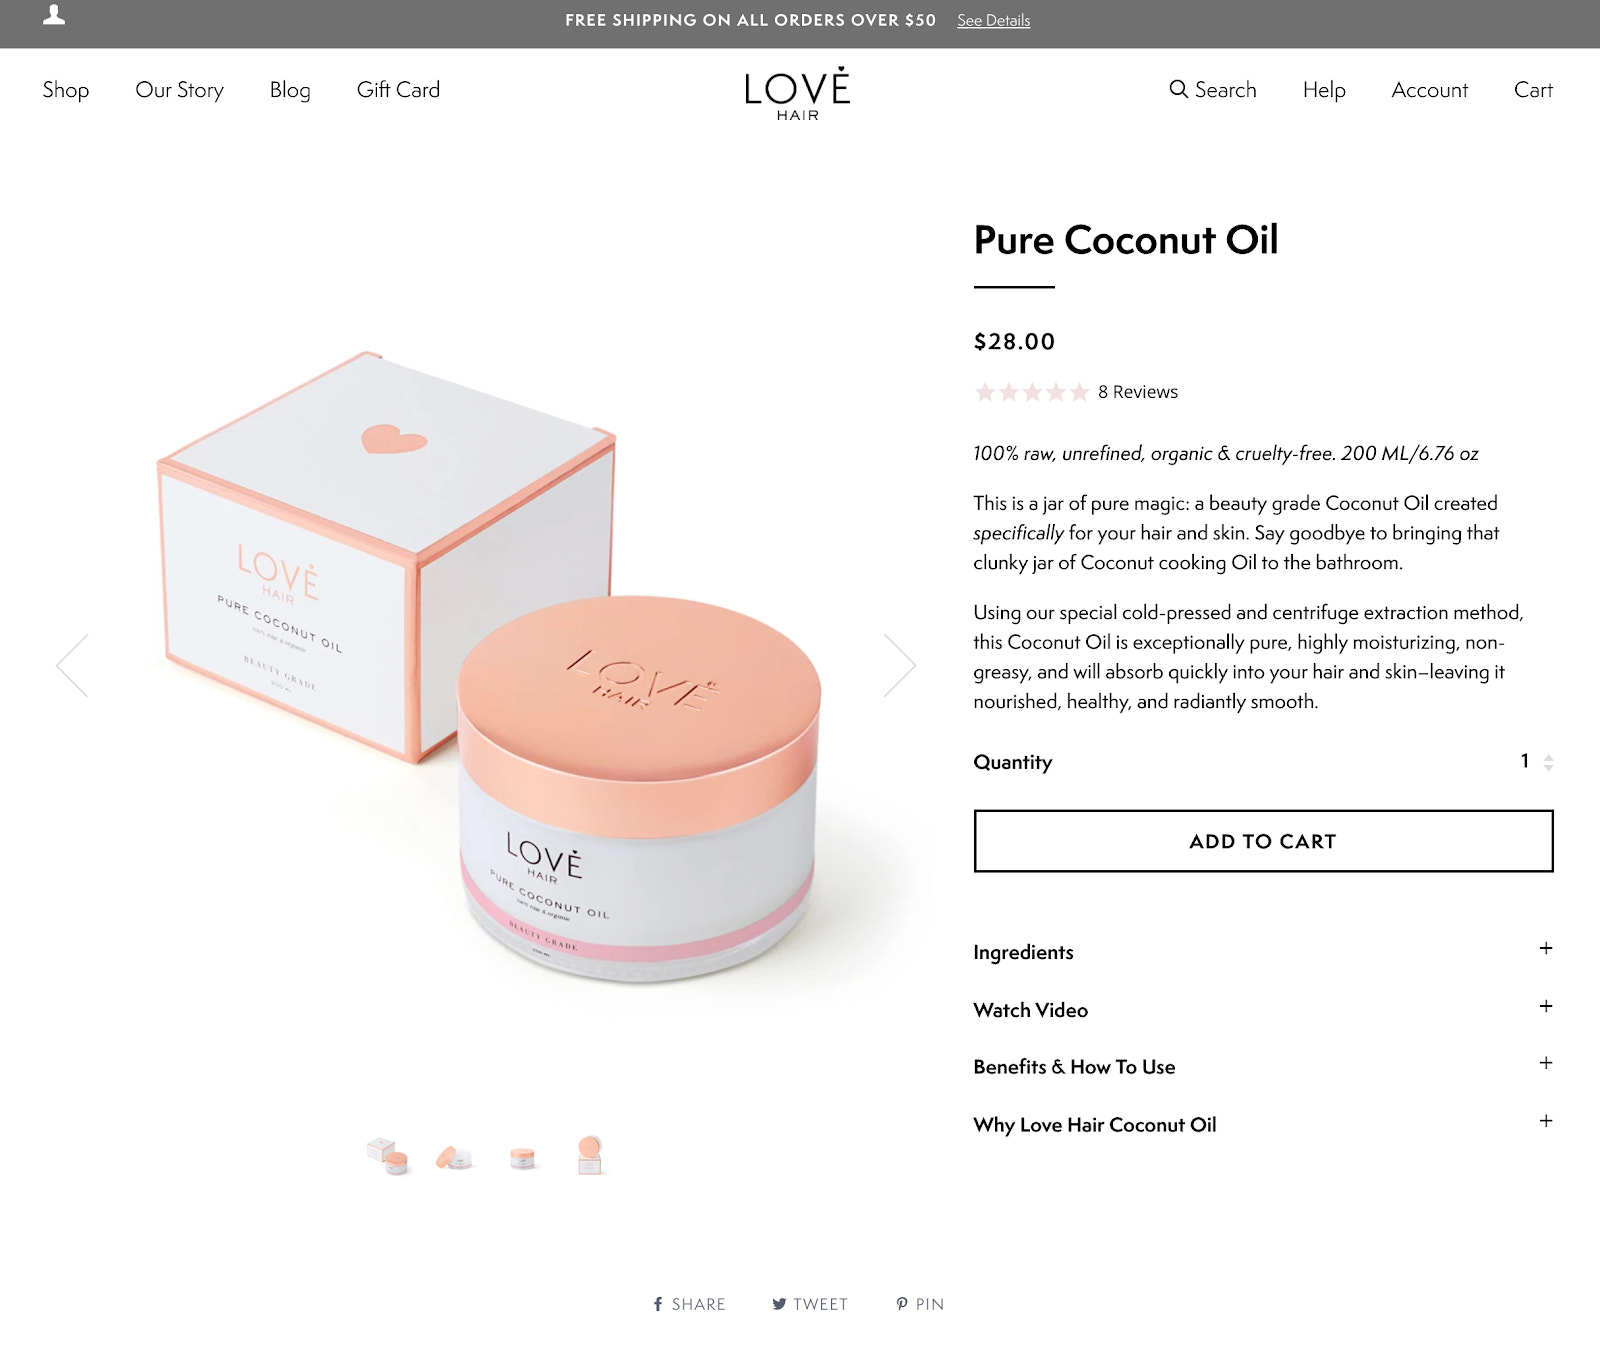 Product Pages: 16 Beautiful Product Page Designs (2023) - Shopify Australia